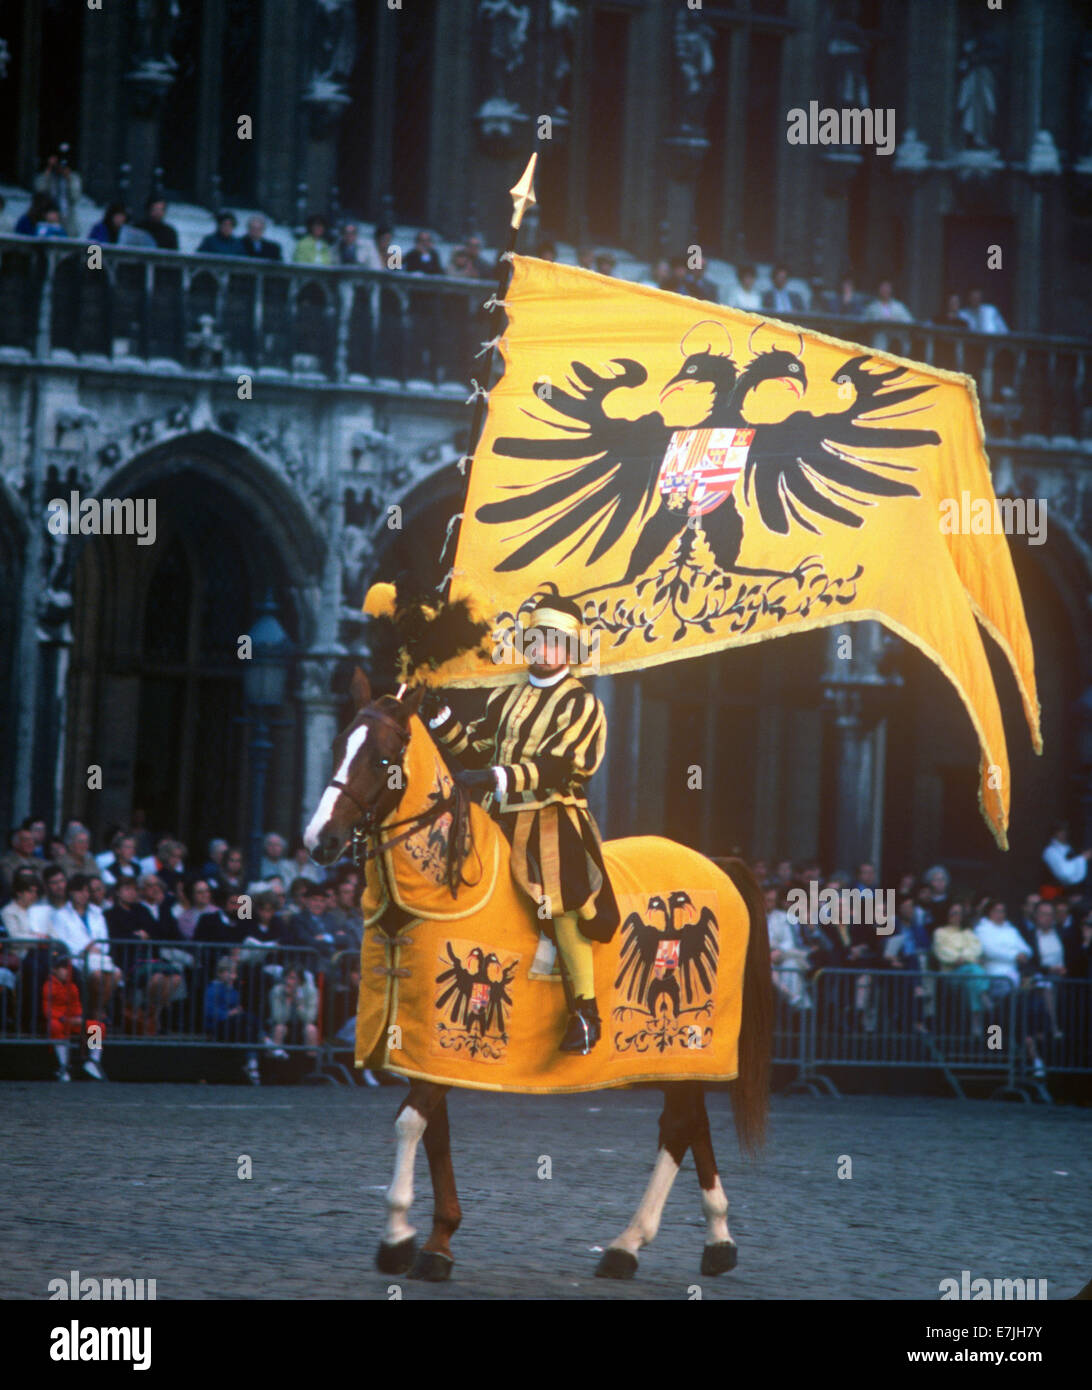 Horse & Rider, Ommegang, medieval, Brussels, Belgium Stock Photo